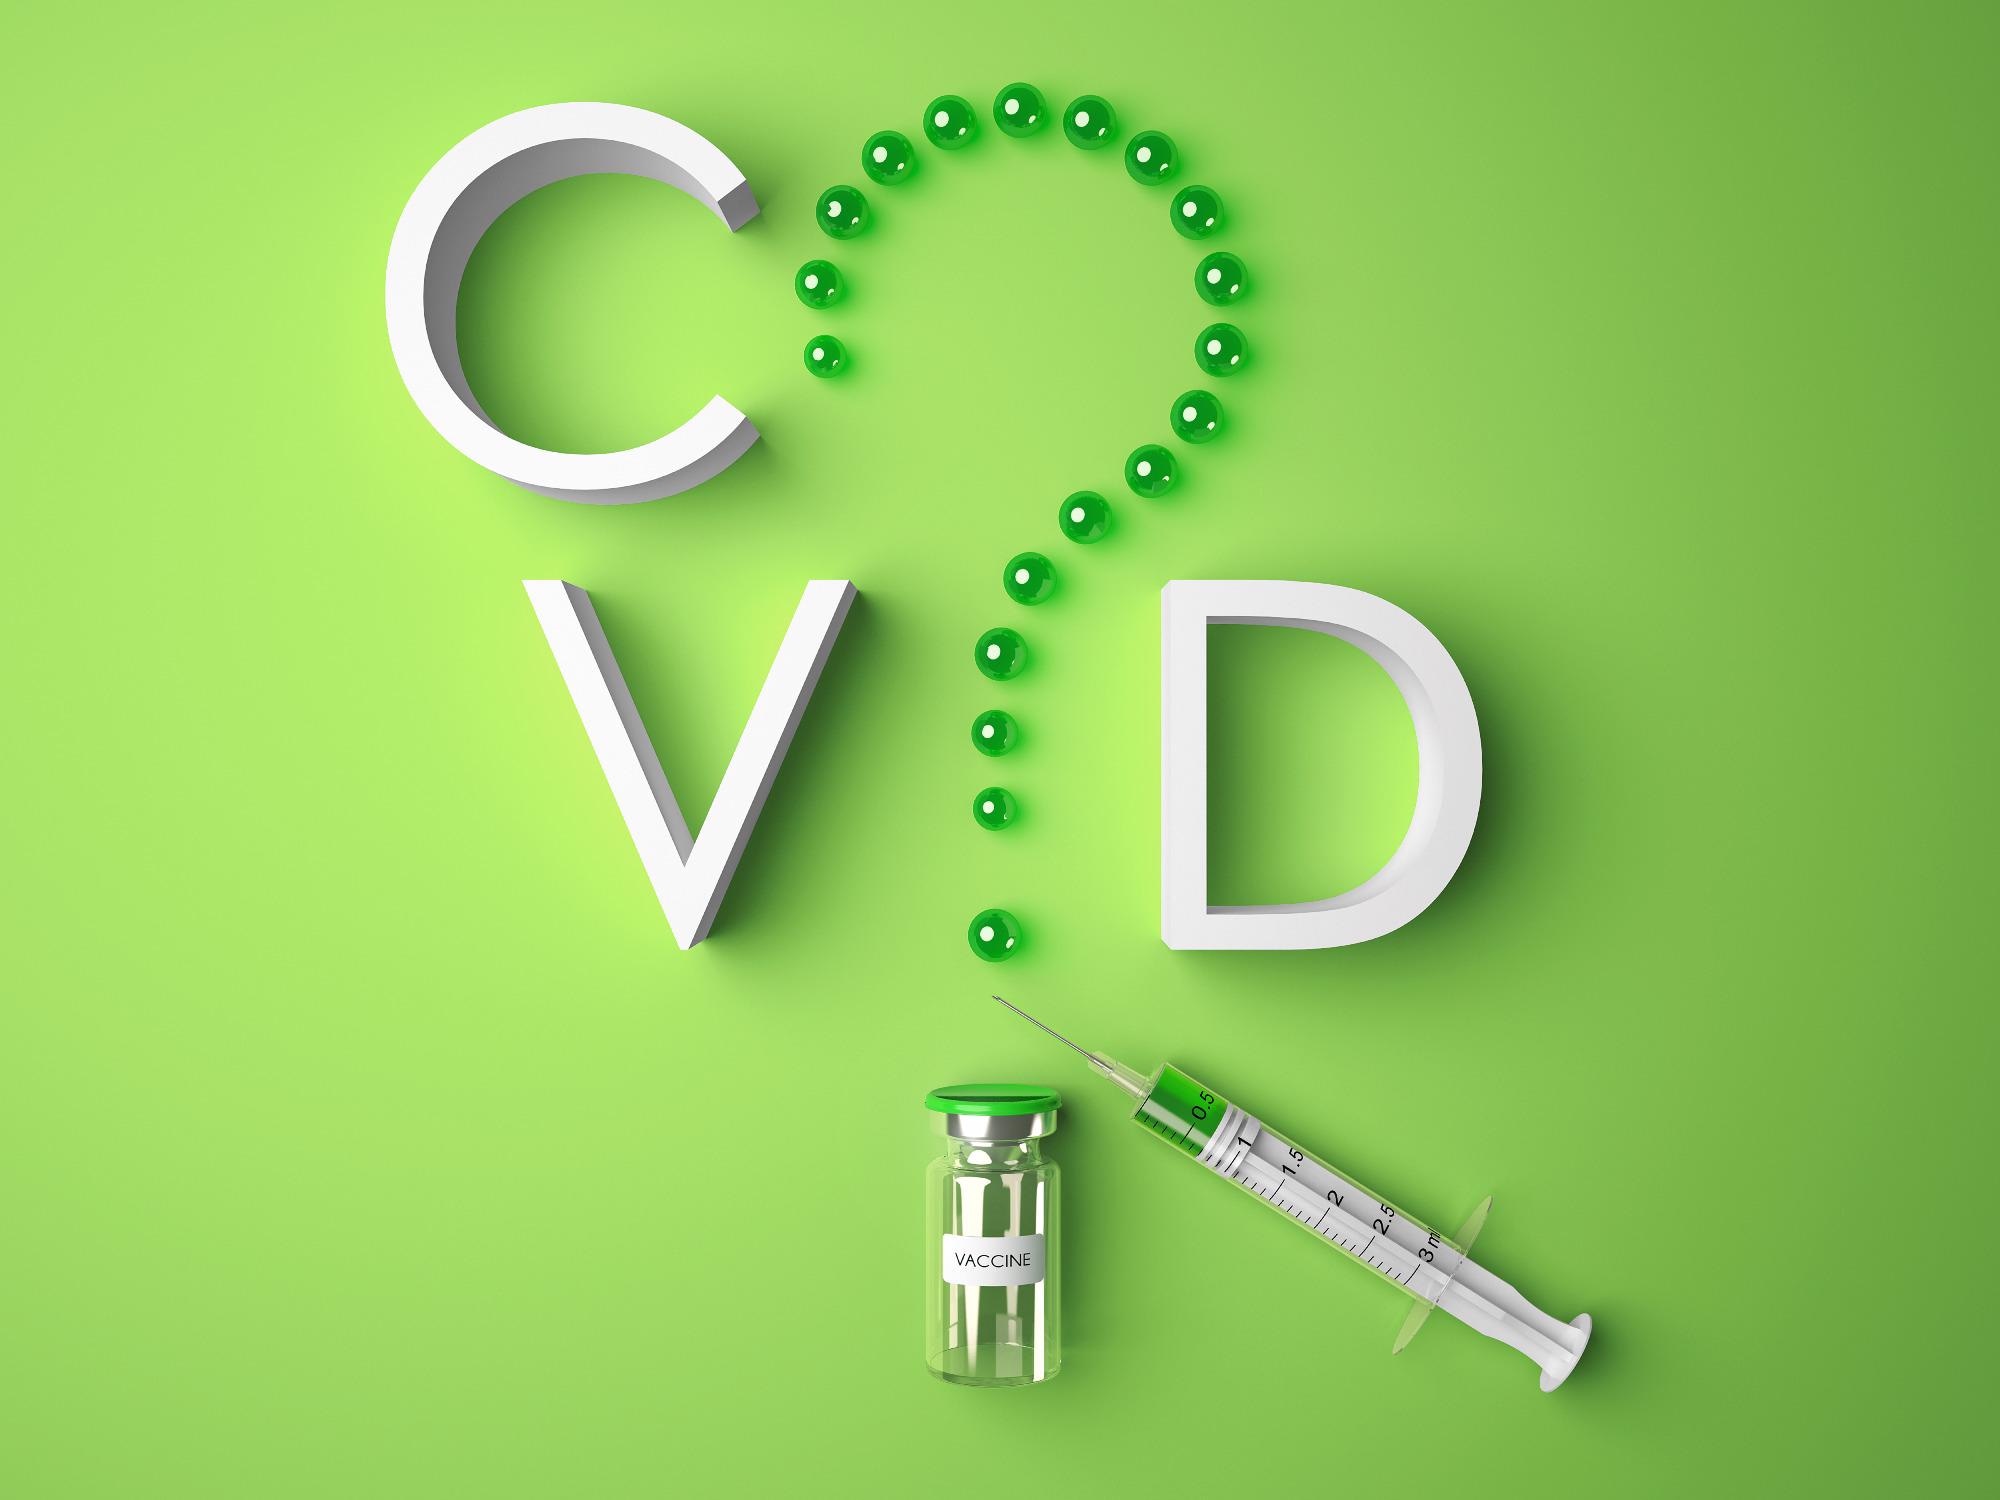 Study: Community-level characteristics of COVID-19 vaccine hesitancy in England: A nationwide cross-sectional study. annaevlanova / Shutterstock